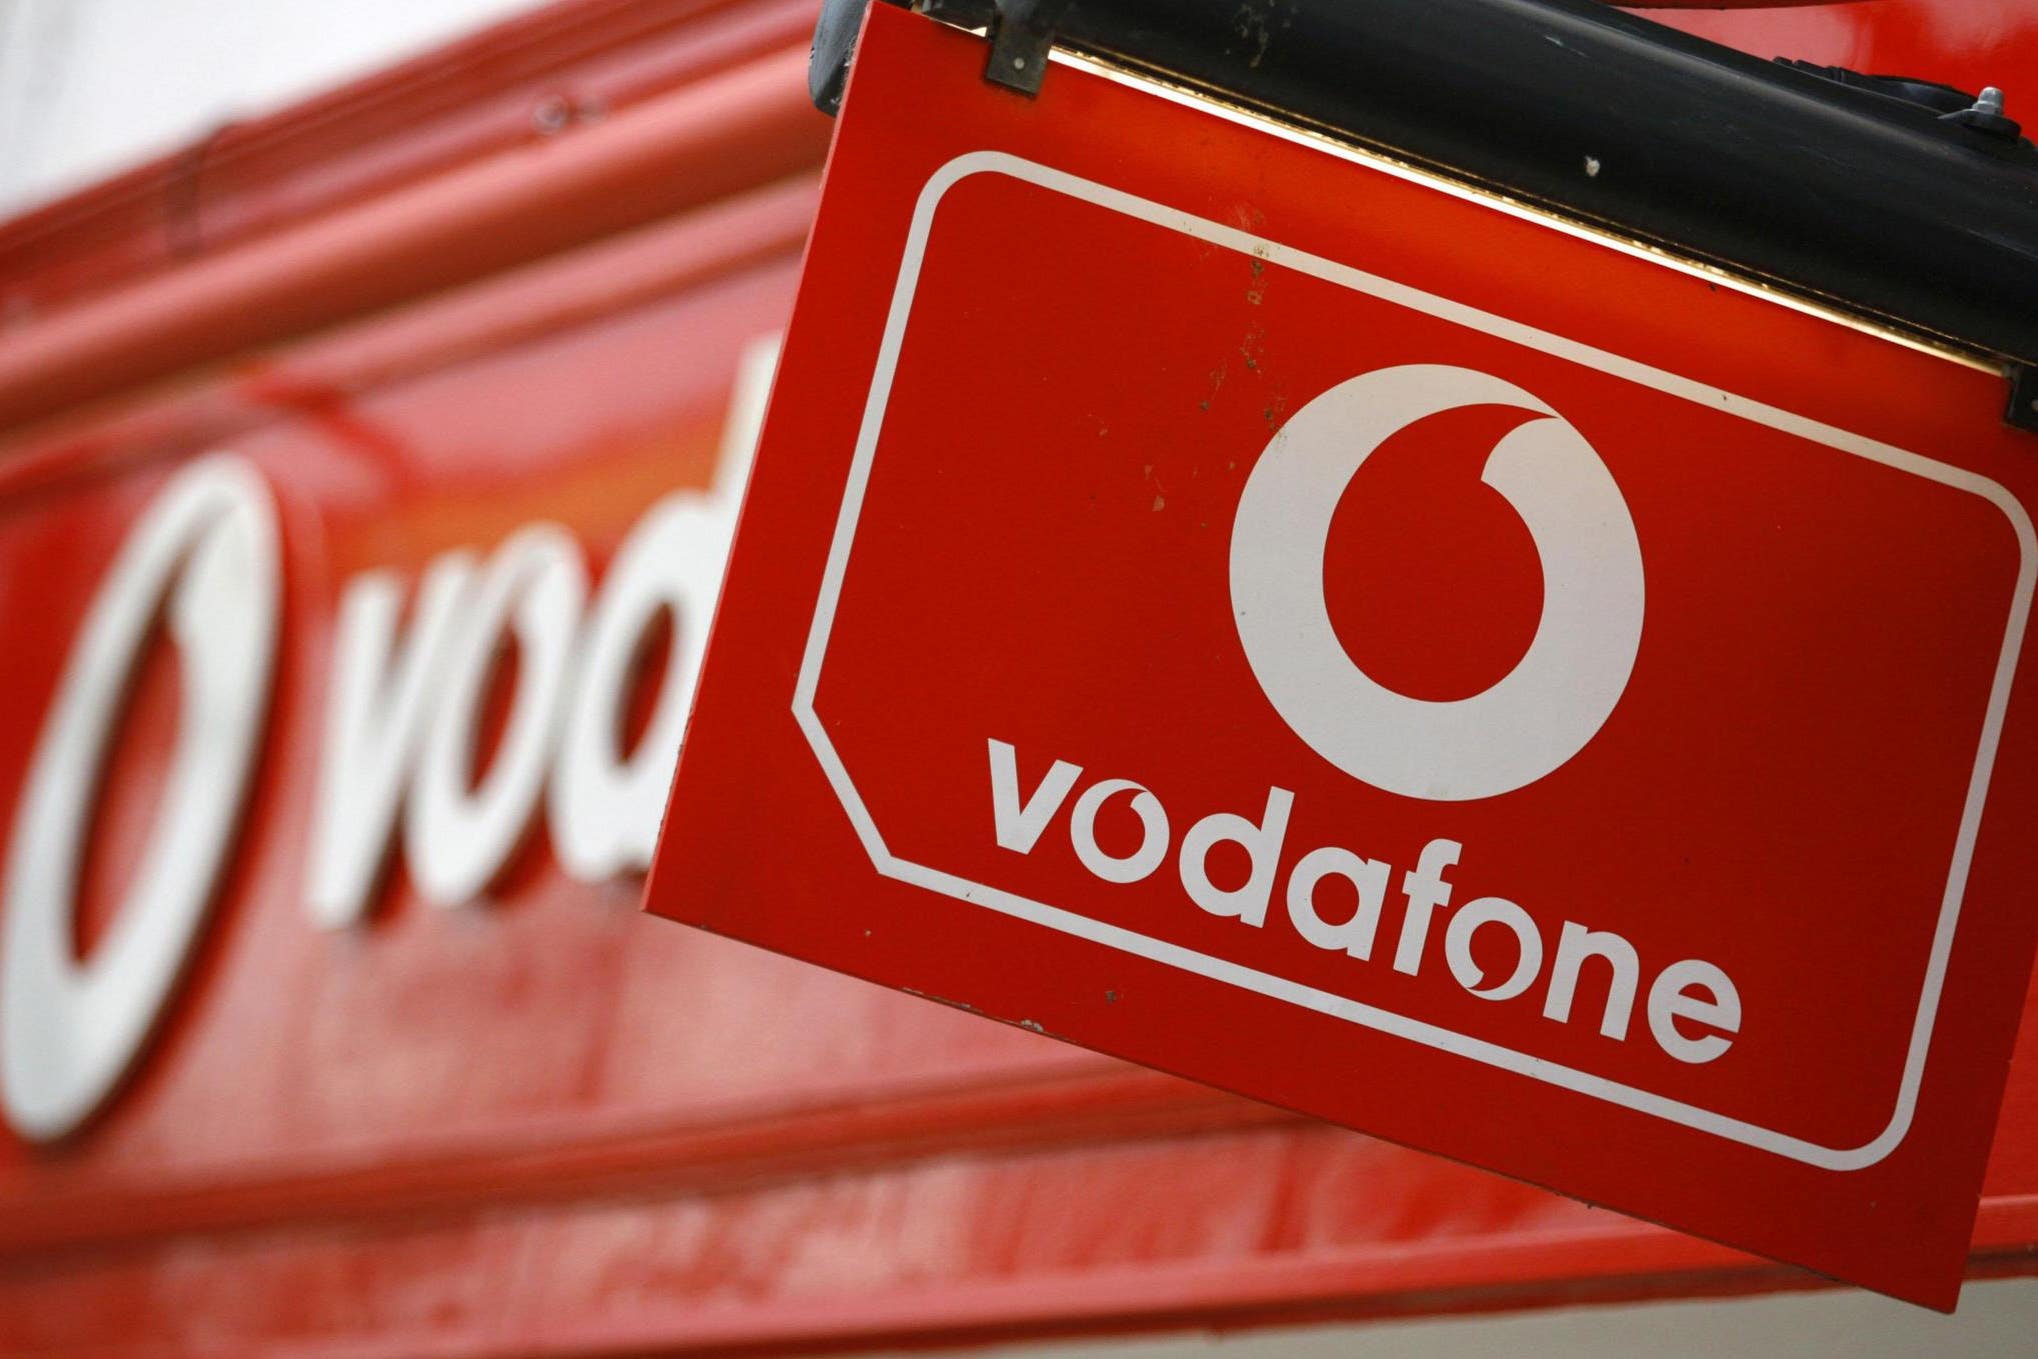 Mobile phone giant Vodafone has confirmed talks to sell its Italian business to Switzerland’s Swisscom in a deal worth 8 billion euros (£6.8 billion) (Chris Ison/PA)